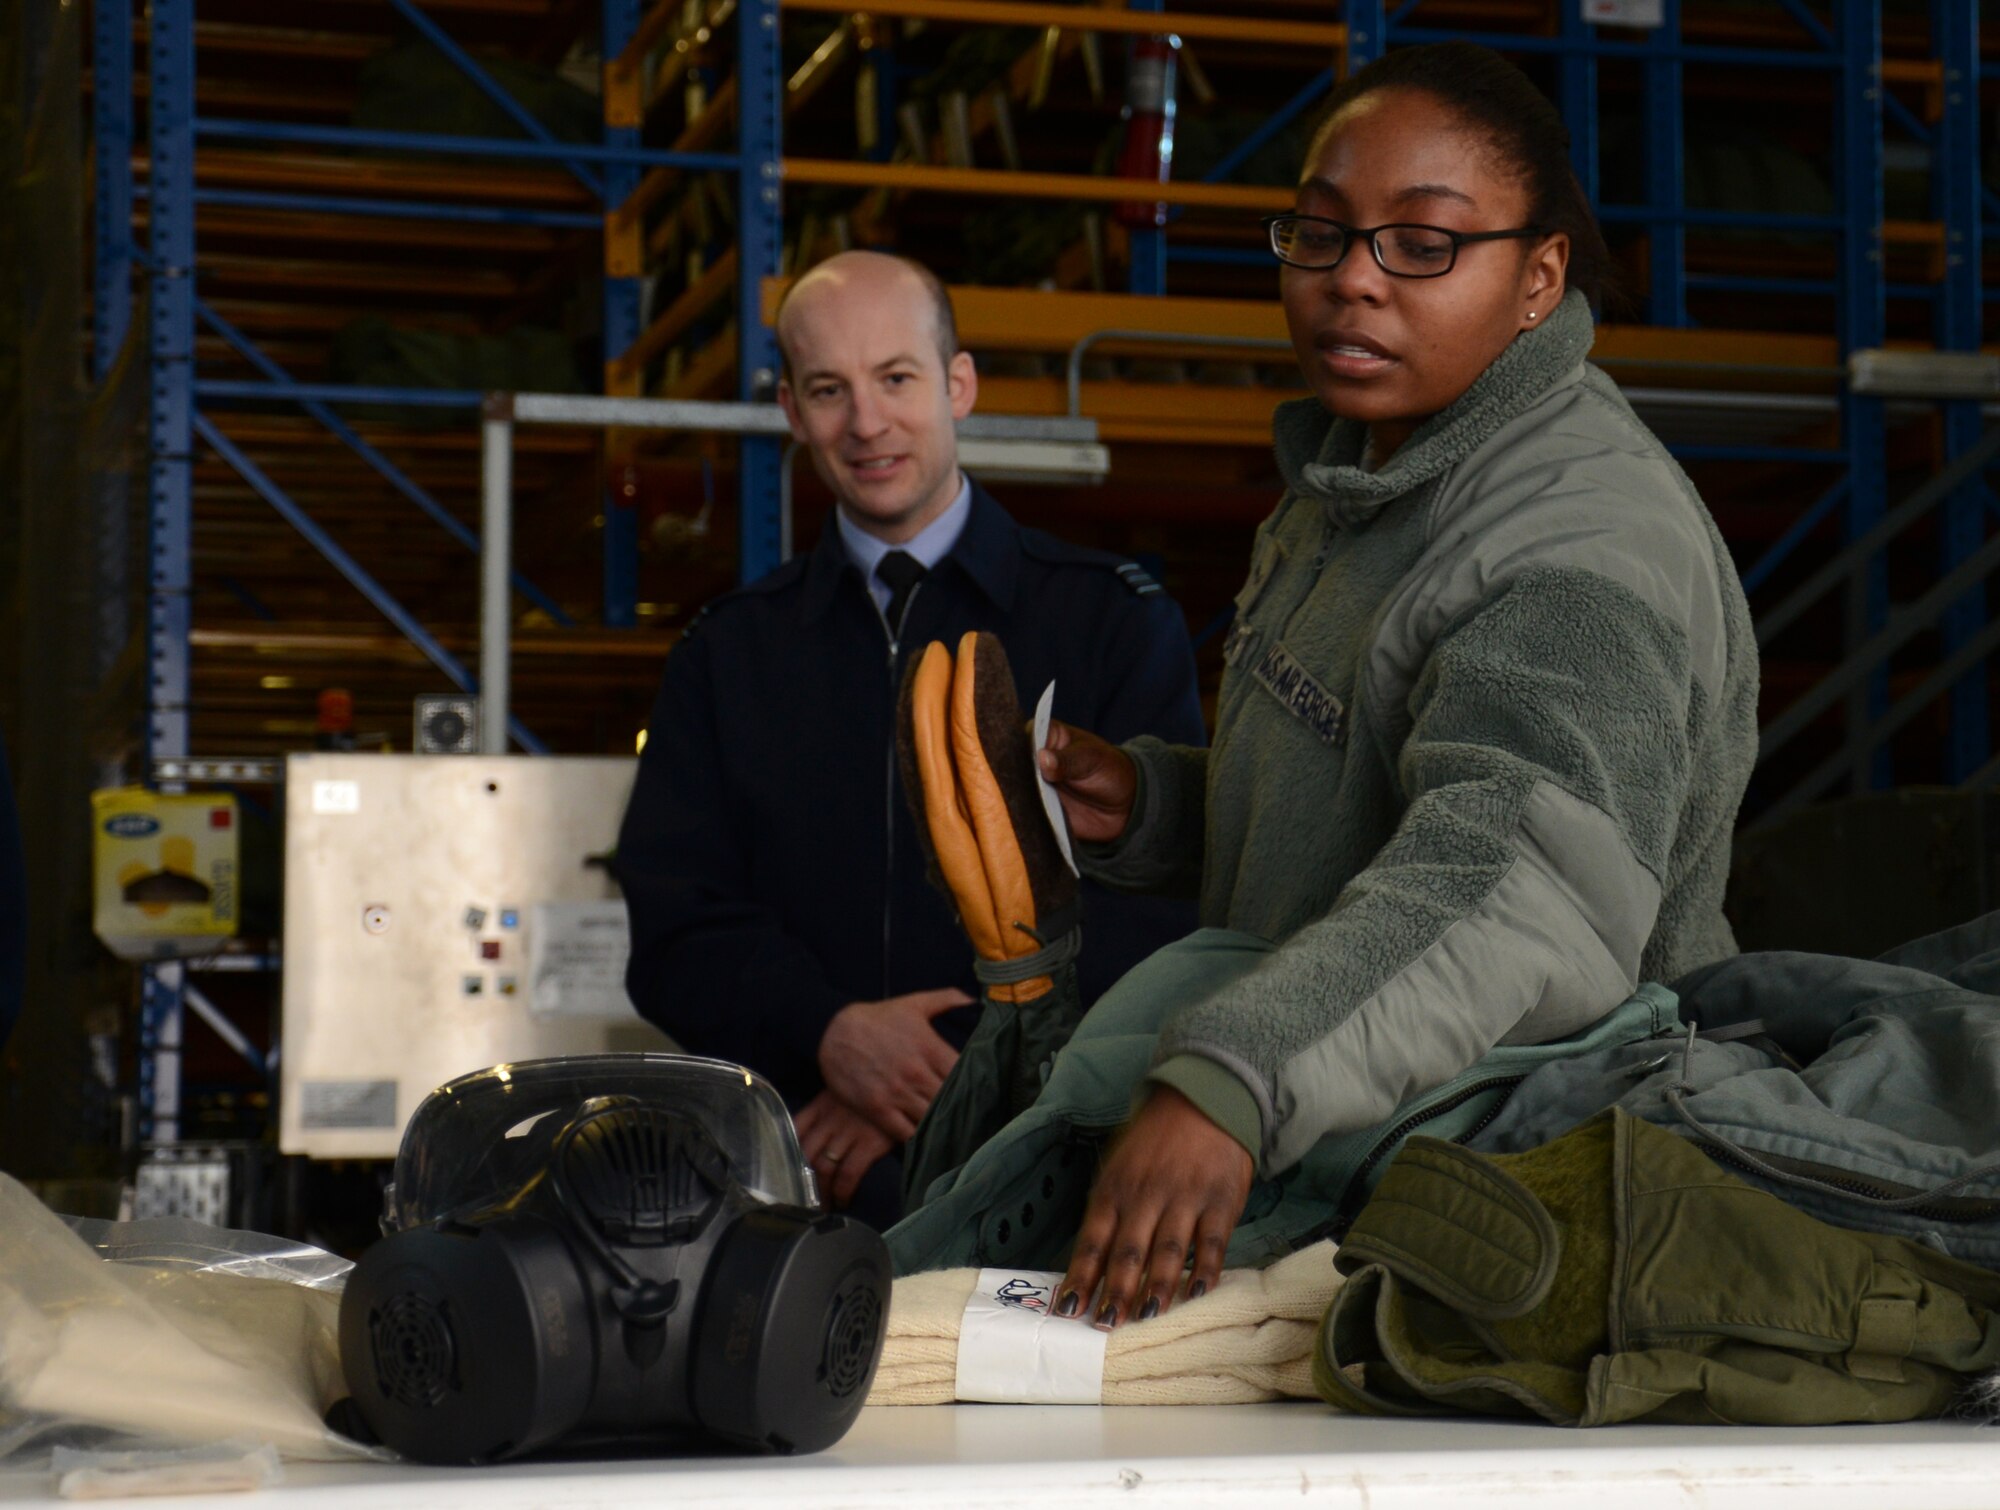 U.S. Air Force Airman 1st Class Andrea Blackmon, right, 100th Logistics Readiness Squadron Individual Protective Equipment mobility apprentice from Miami, Fla., shows equipment and clothing to Royal Air Force Logistics officers during a tour of the LRS squadron Feb. 24, 2015, on RAF Mildenhall, England. Members of the RAF visited with members of the 100th LRS during a site tour to further improve relations between the two nations. (U.S. Air Force photo by Gina Randall/Released)